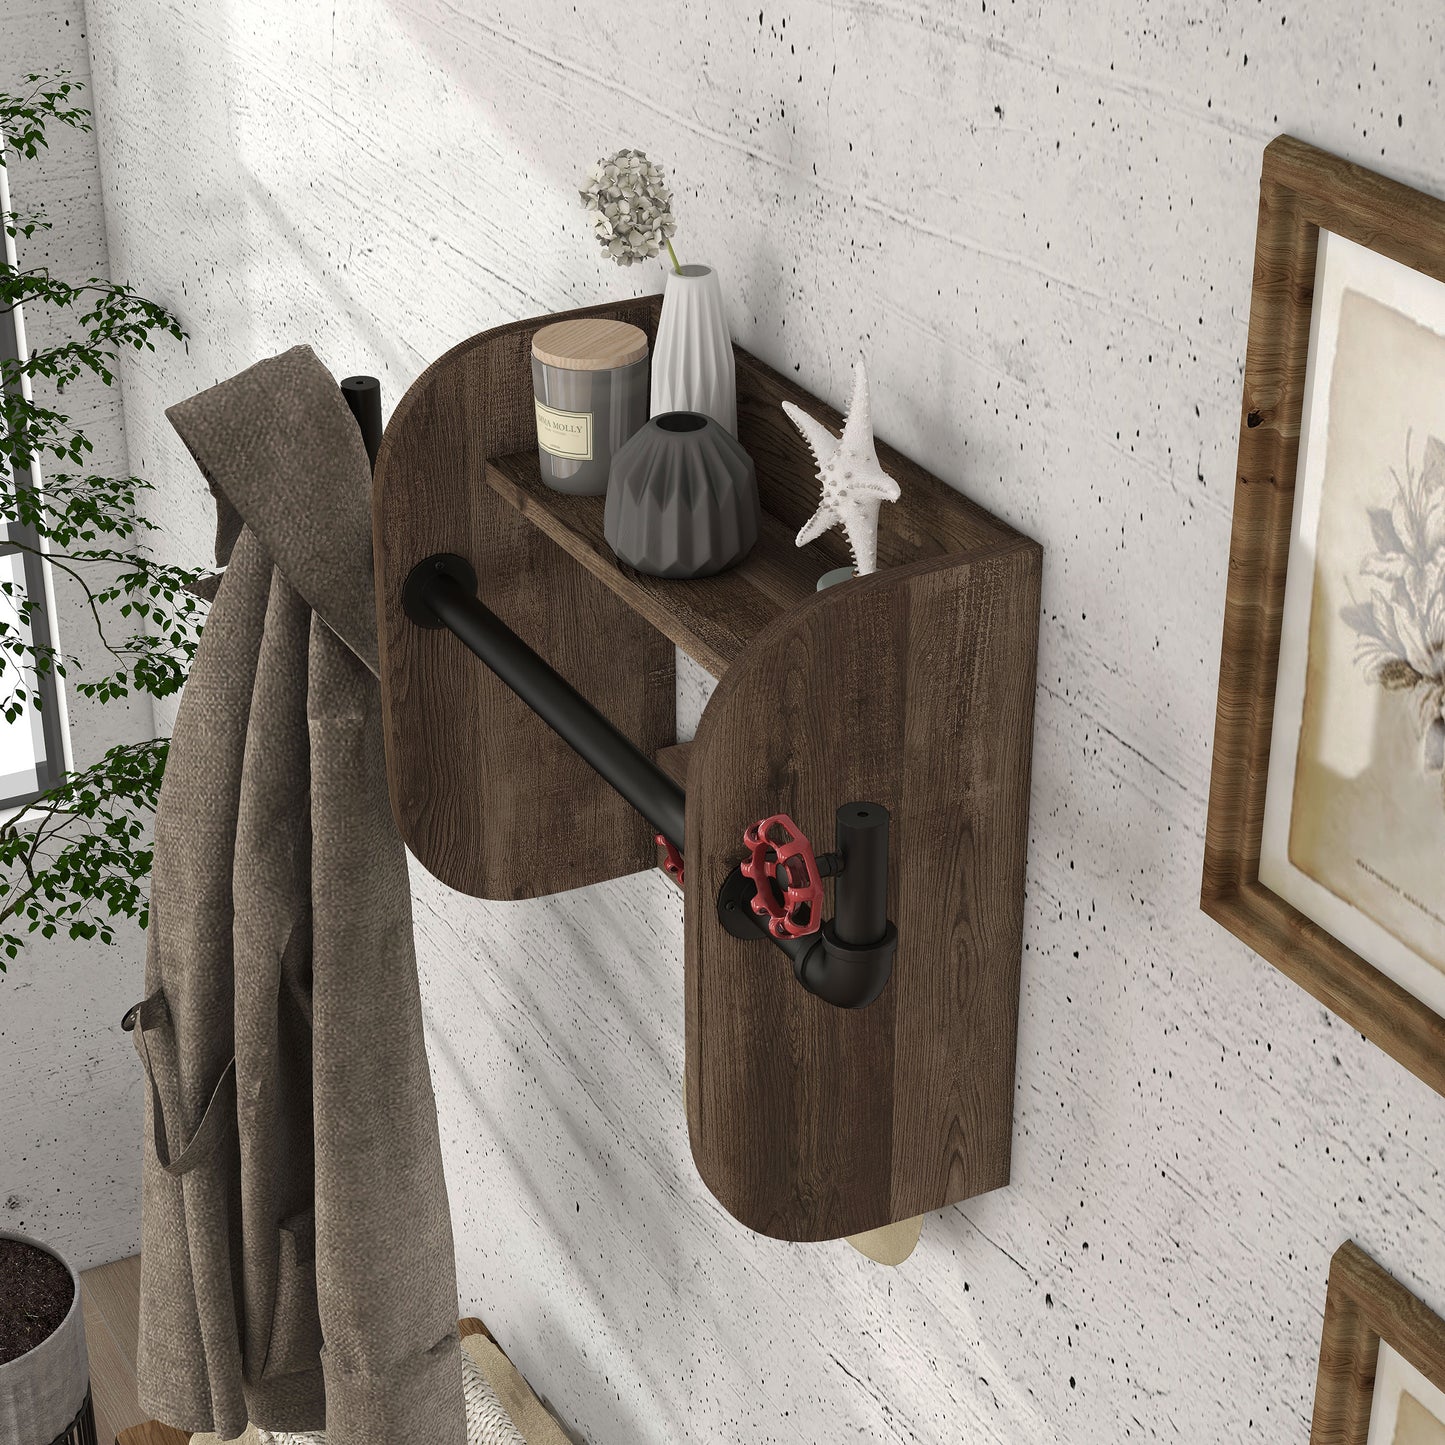 Left angled bird's eye view of an industrial reclaimed oak and water valve wall mounted coat rack with one shelf in an entryway with accessories